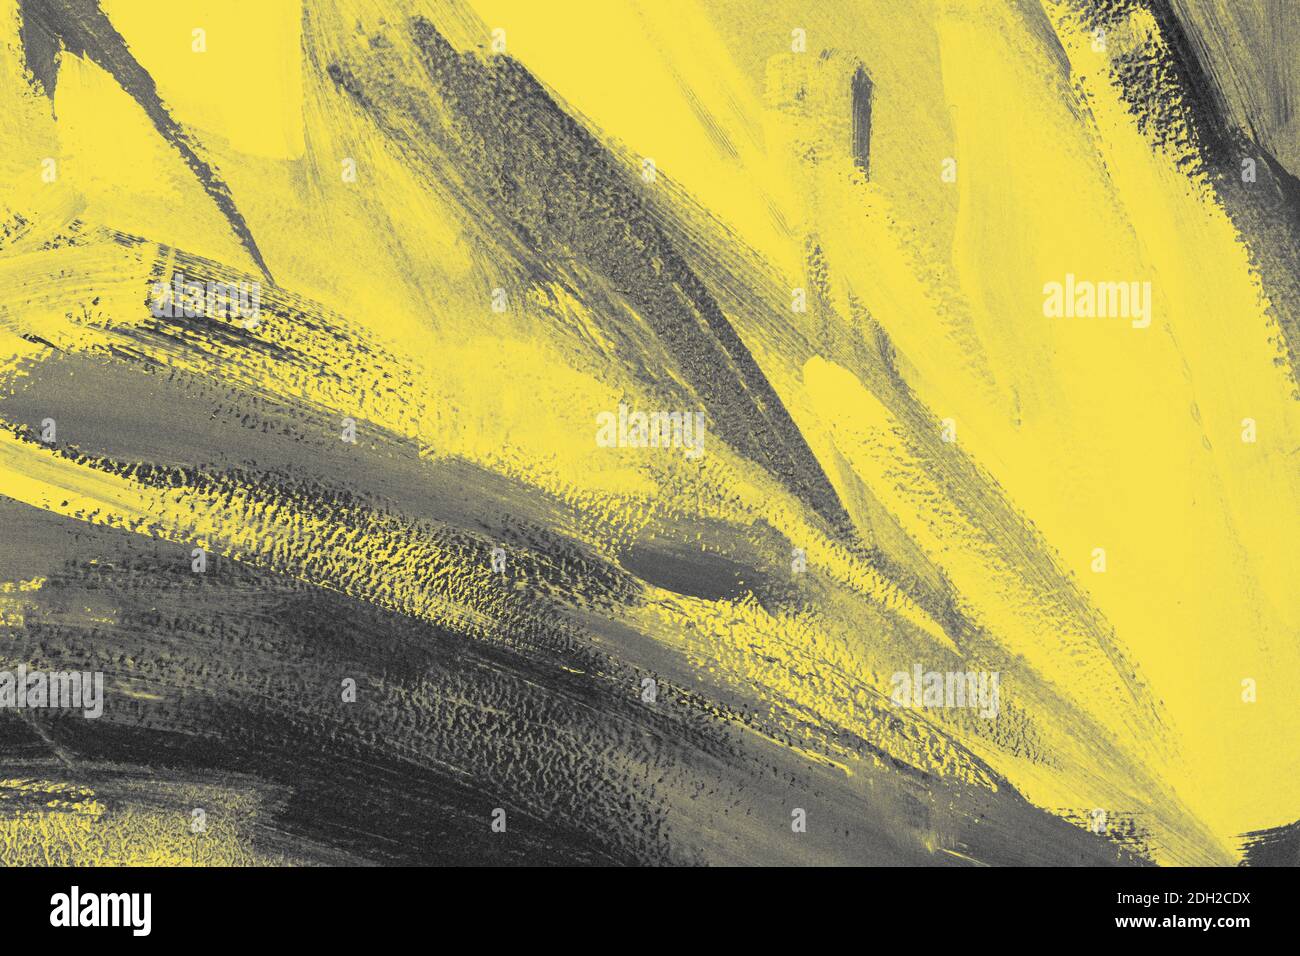 yellow and gray abstract art color texture Stock Photo